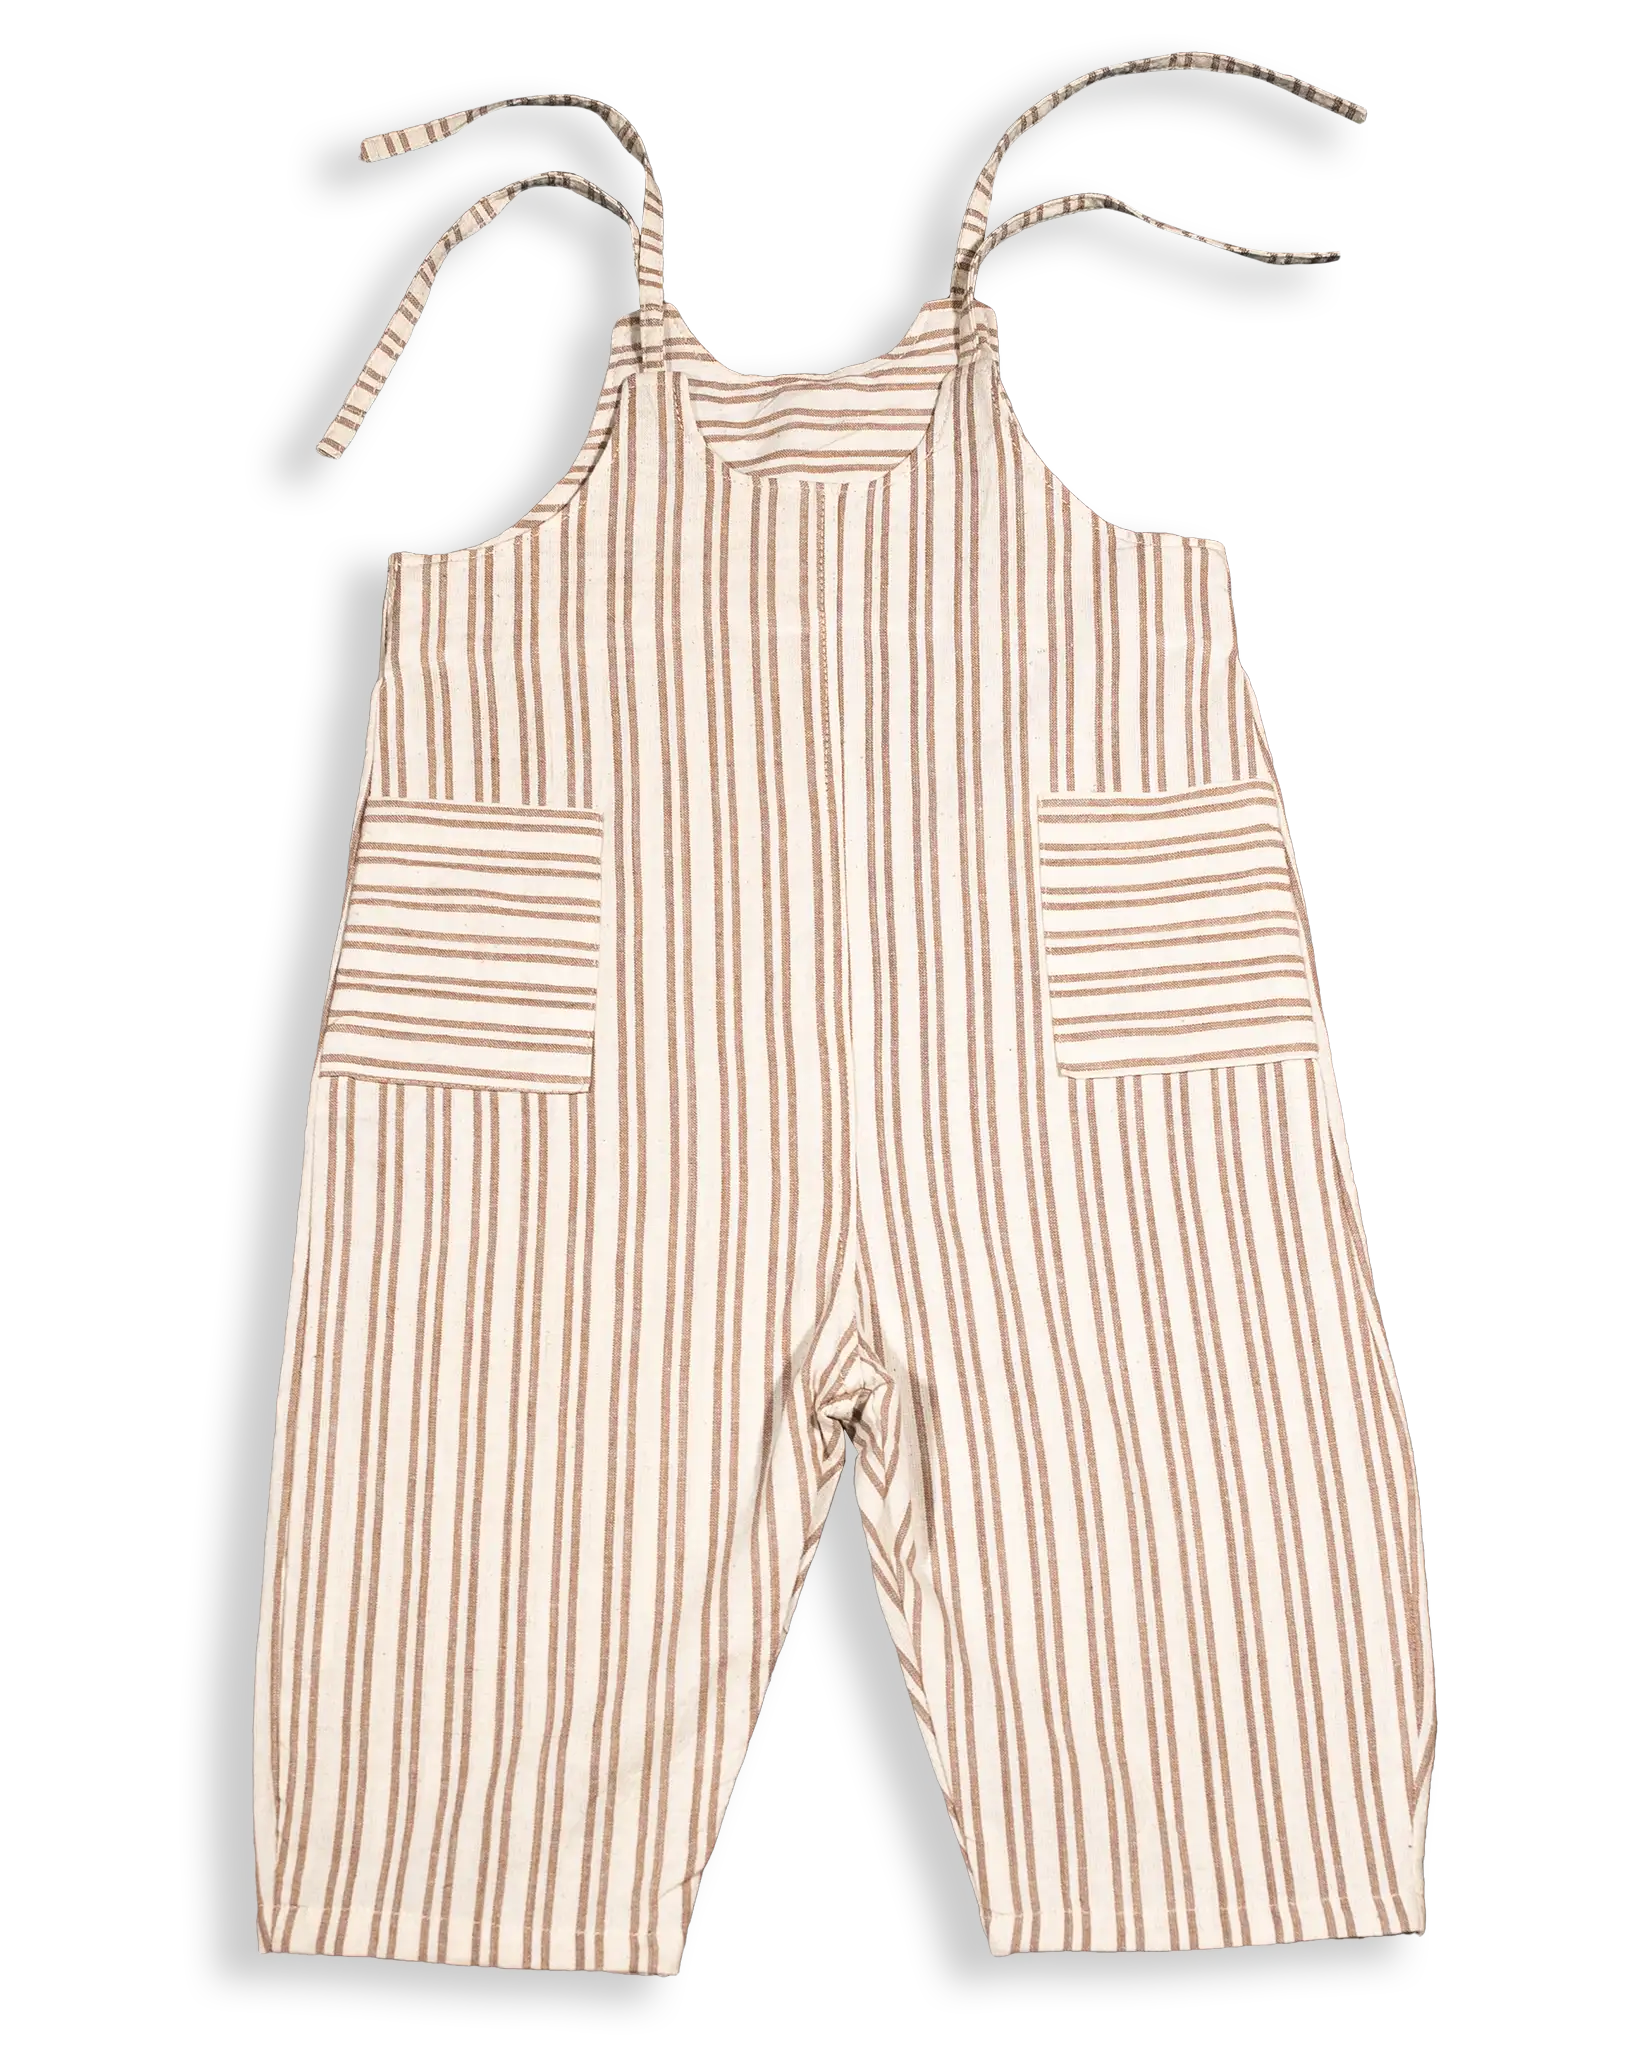 Children love soft, breathable cotton clothes! These Dungarees are made from woven fabrics which are unisex, simple yet cool to wear this summer.